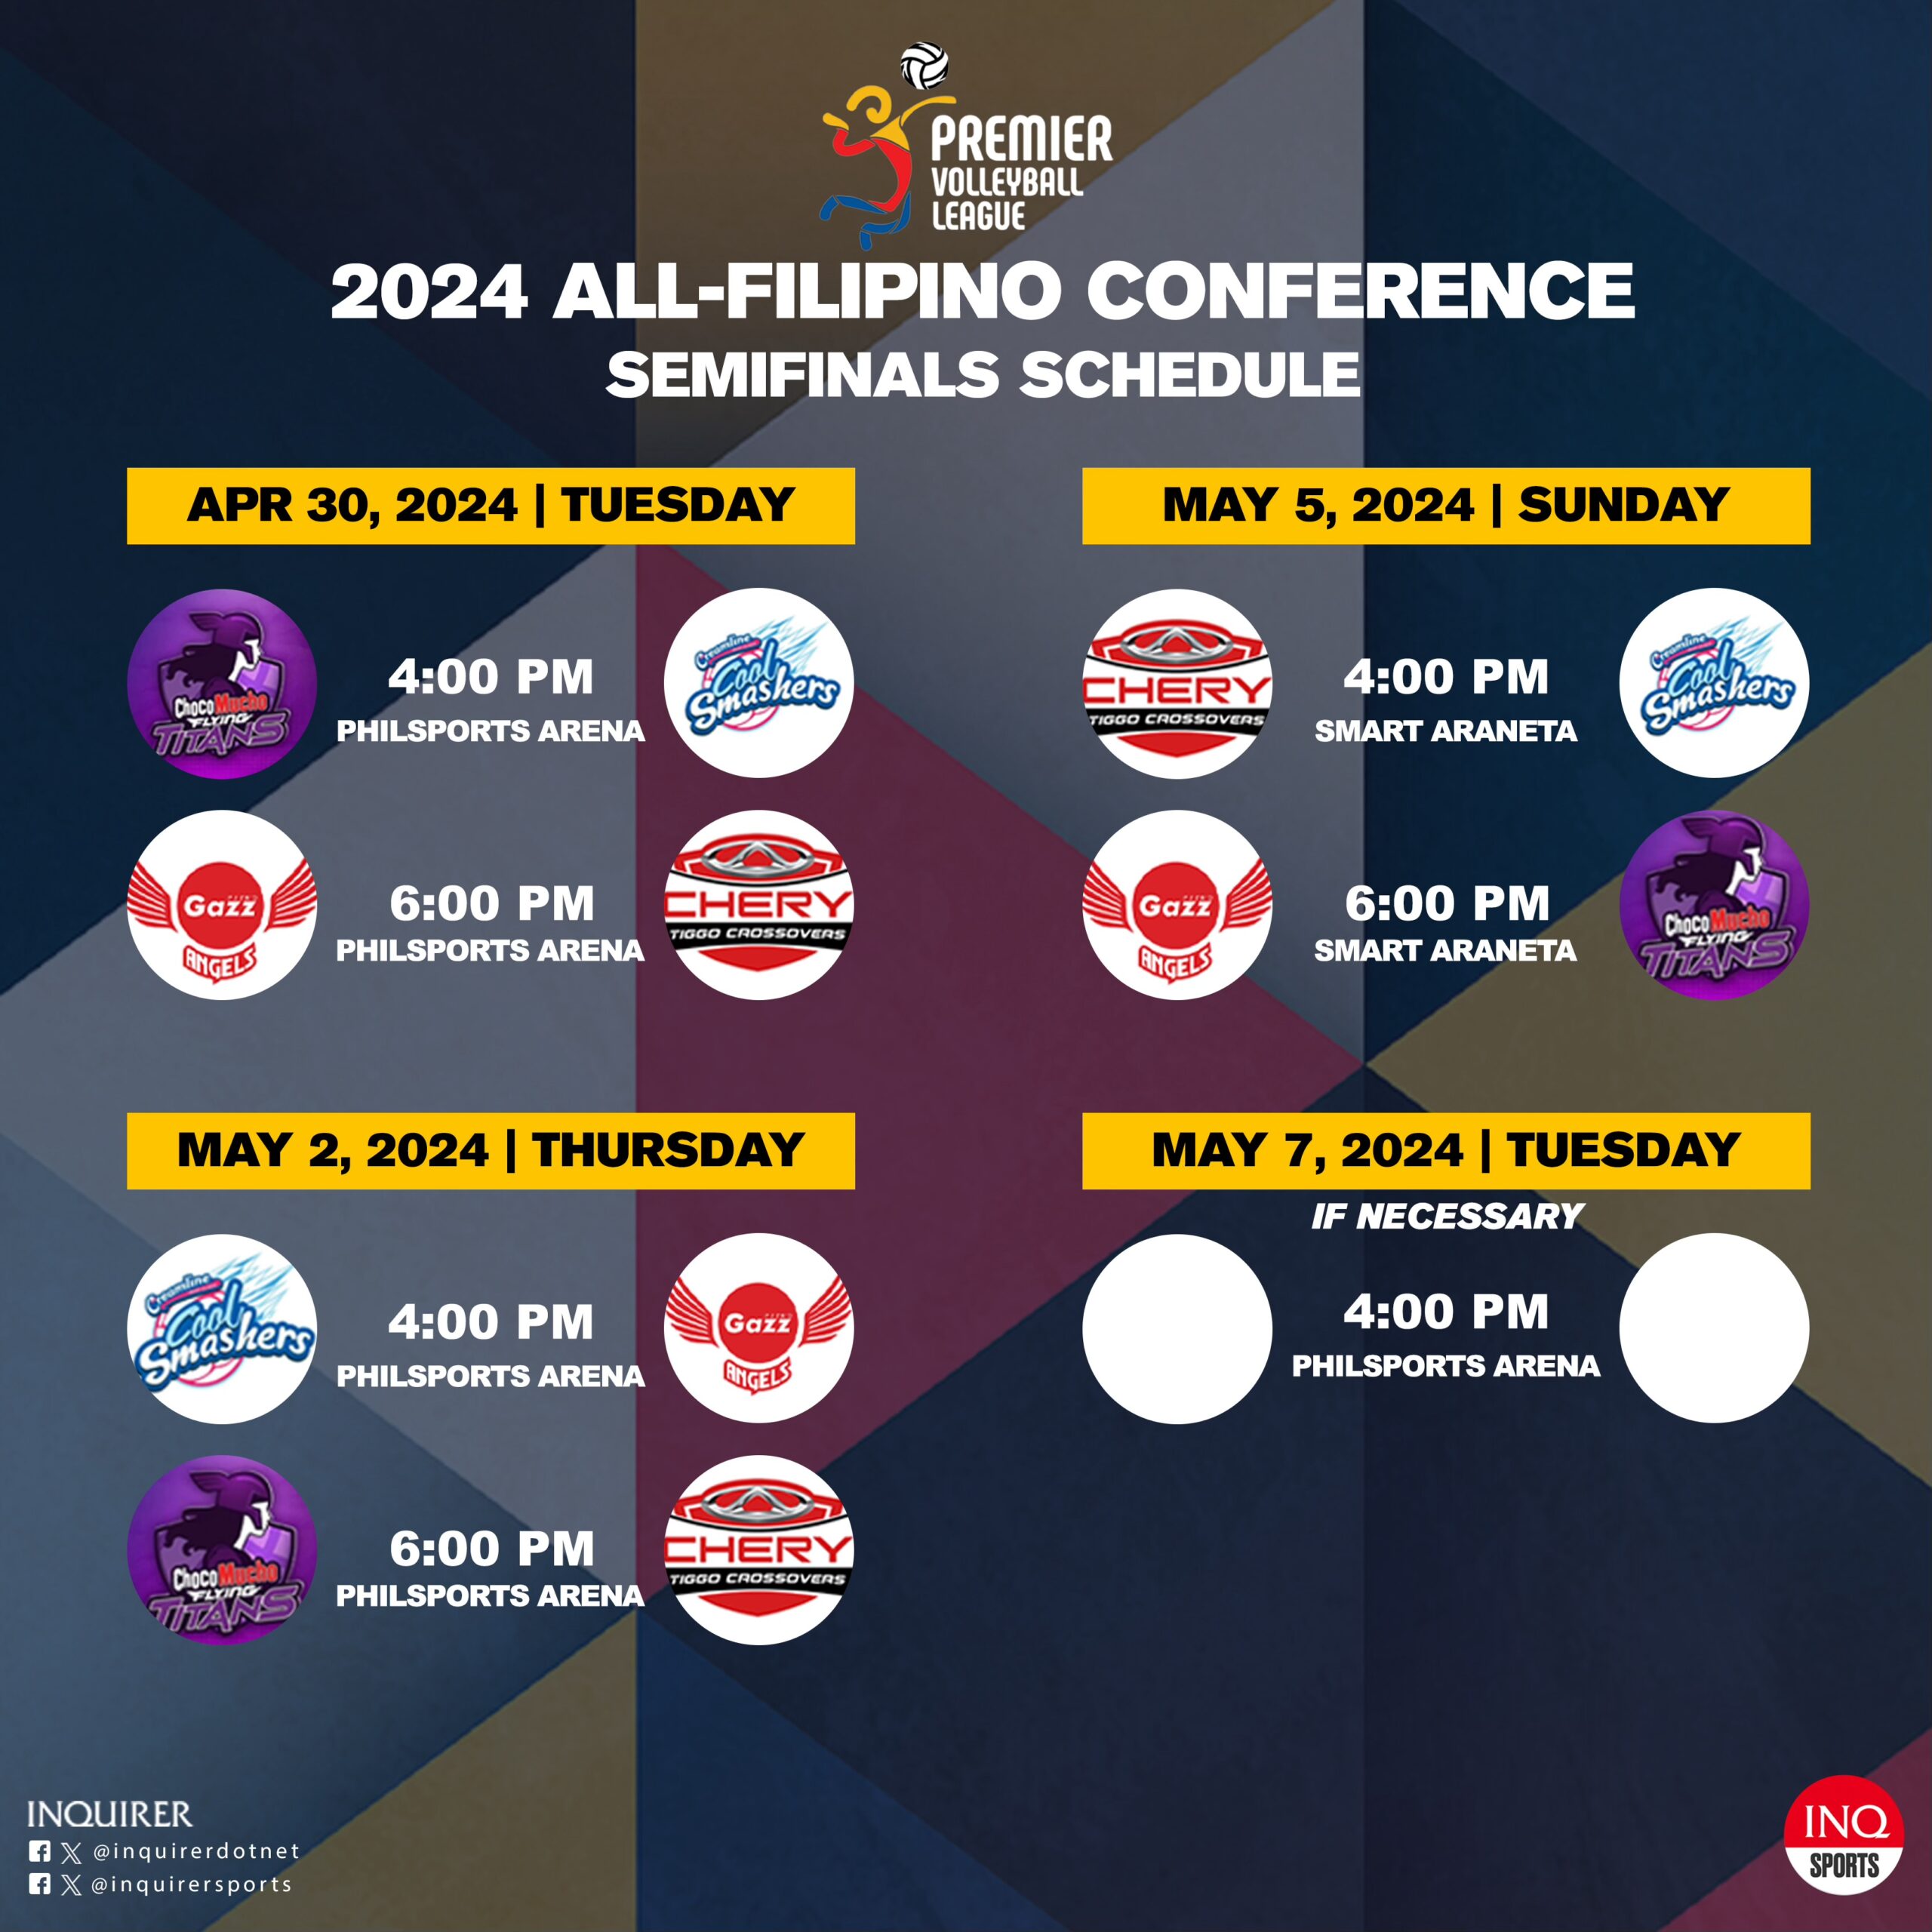 PVL All-Filipino Conference 2024 semifinals round schedule: